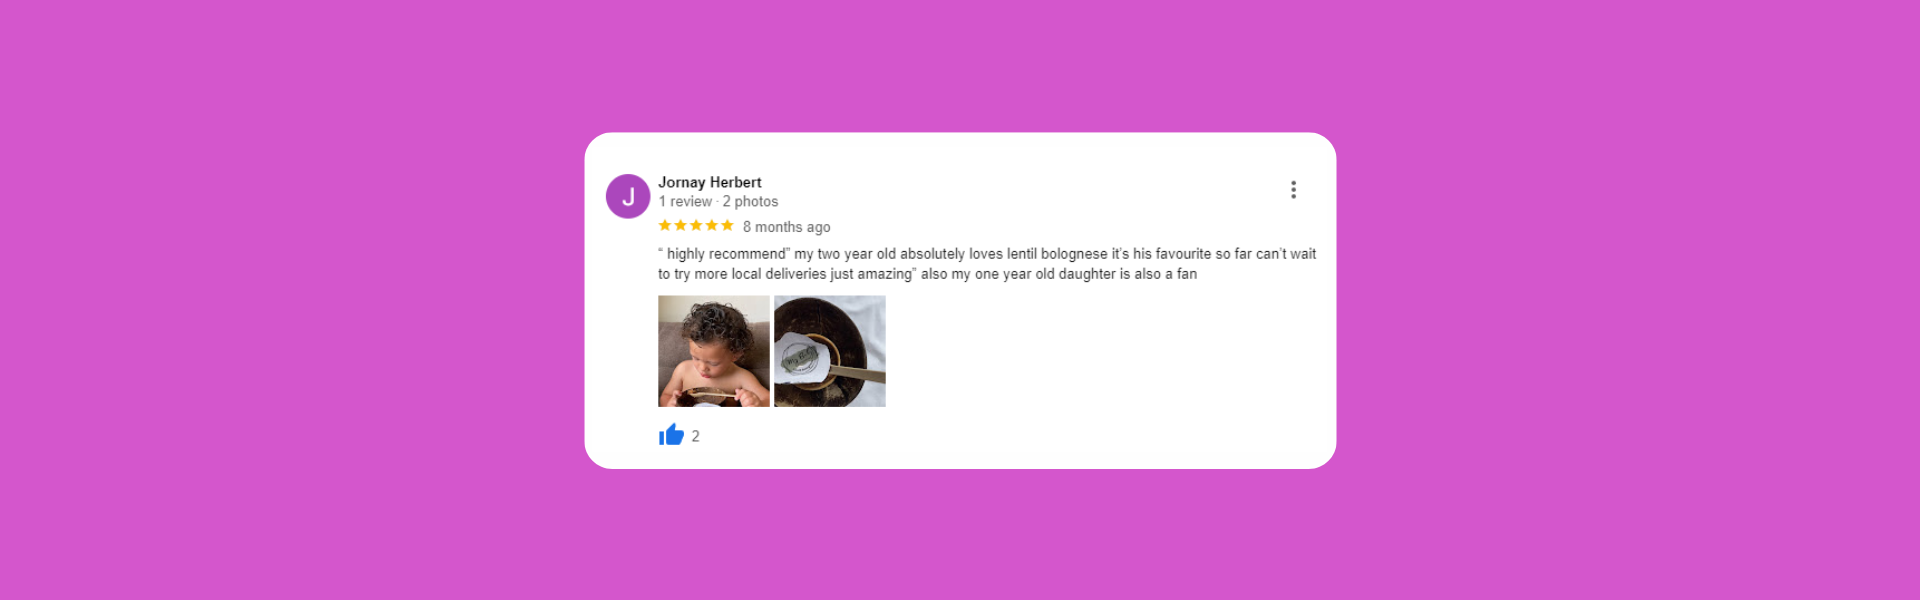 Jornay Herbert 1 review·2 photos 8 months ago “ highly recommend” my two year old absolutely loves lentil bolognese it’s his favourite so far can’t wait to try more local deliveries just amazing” also my one year old daughter is also a fan